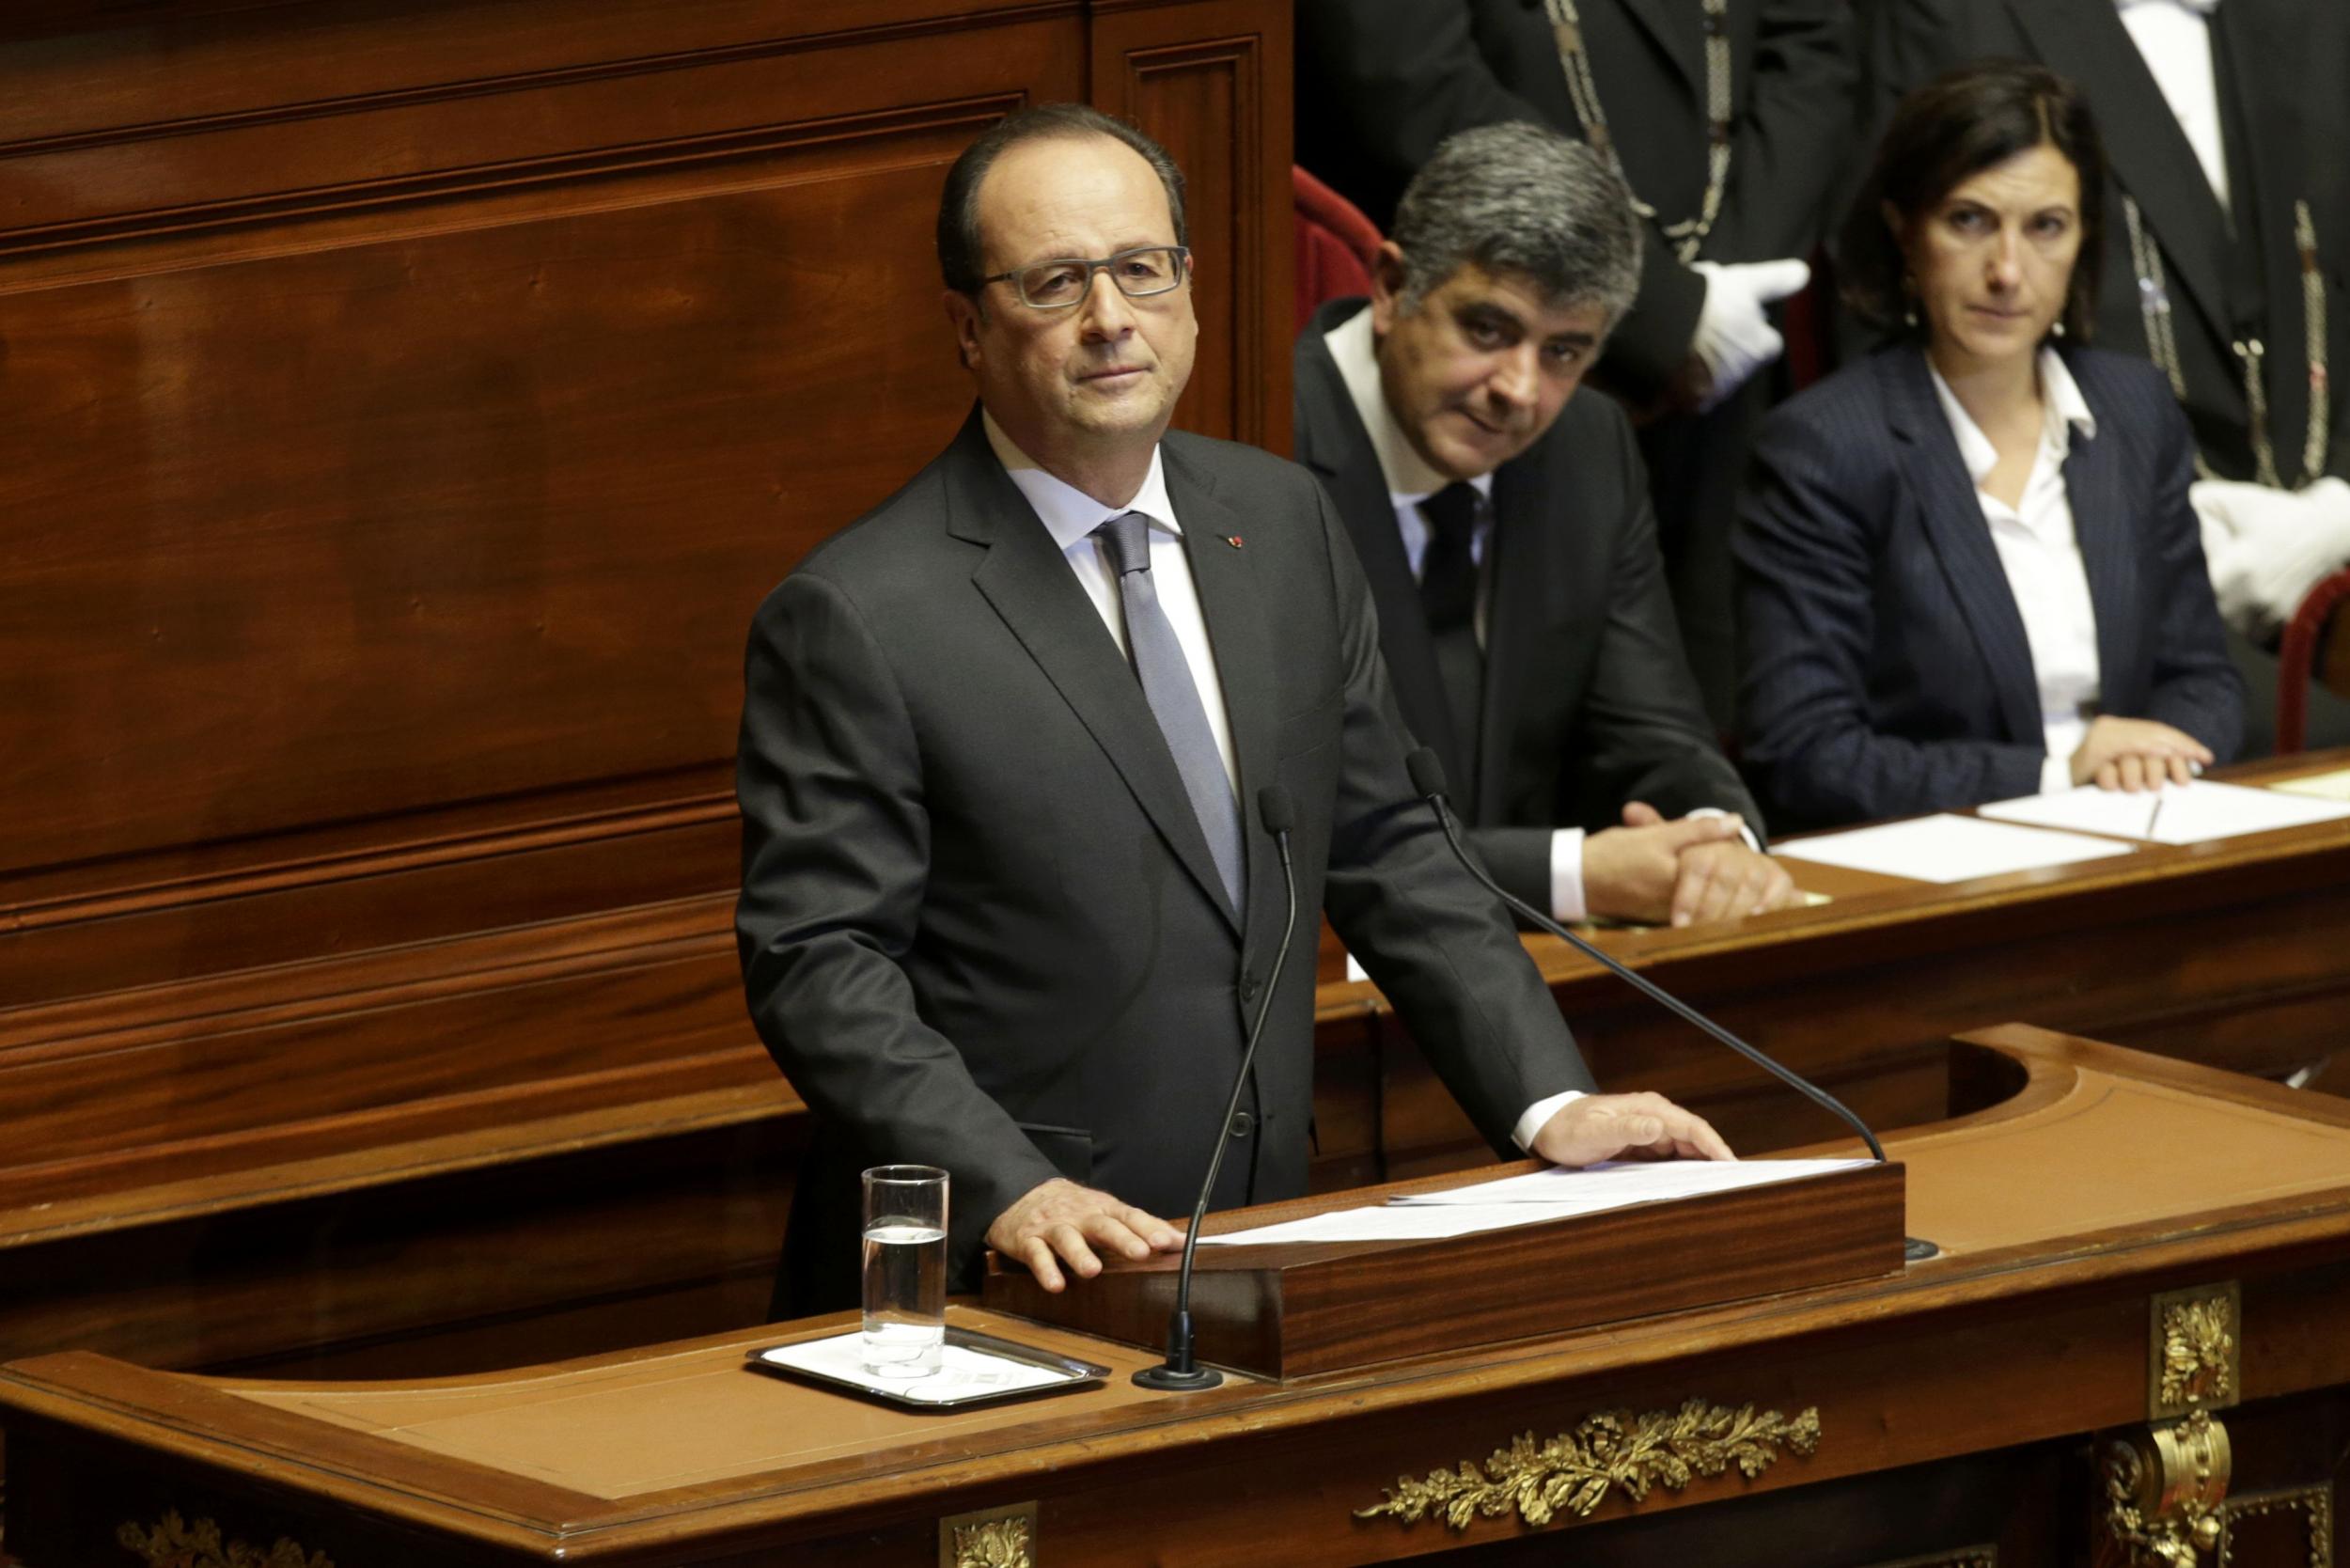 Mr Hollande was addressing a rare joint session of both houses of the French parliament